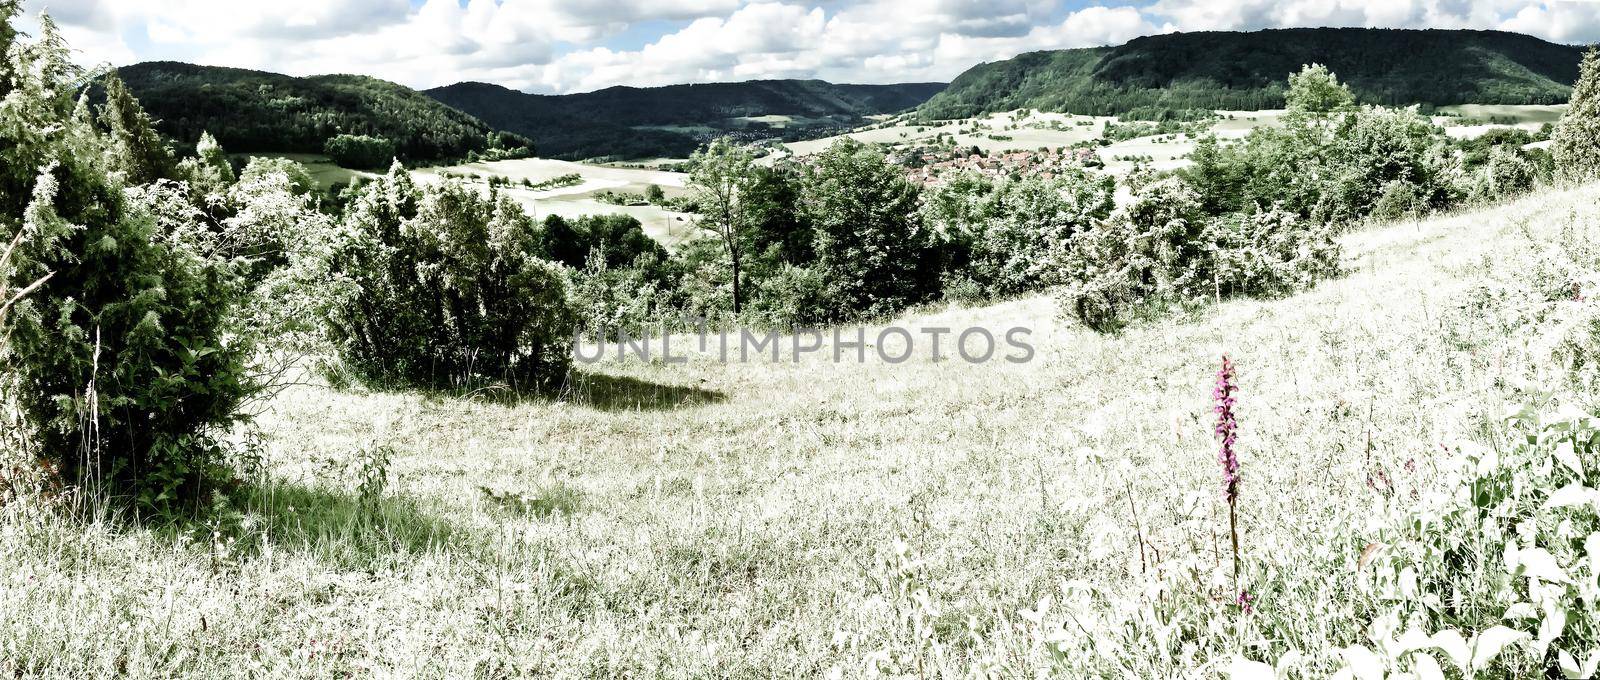 Gymnadenia orchid with panoramic view to the Swabian Alb, infrared